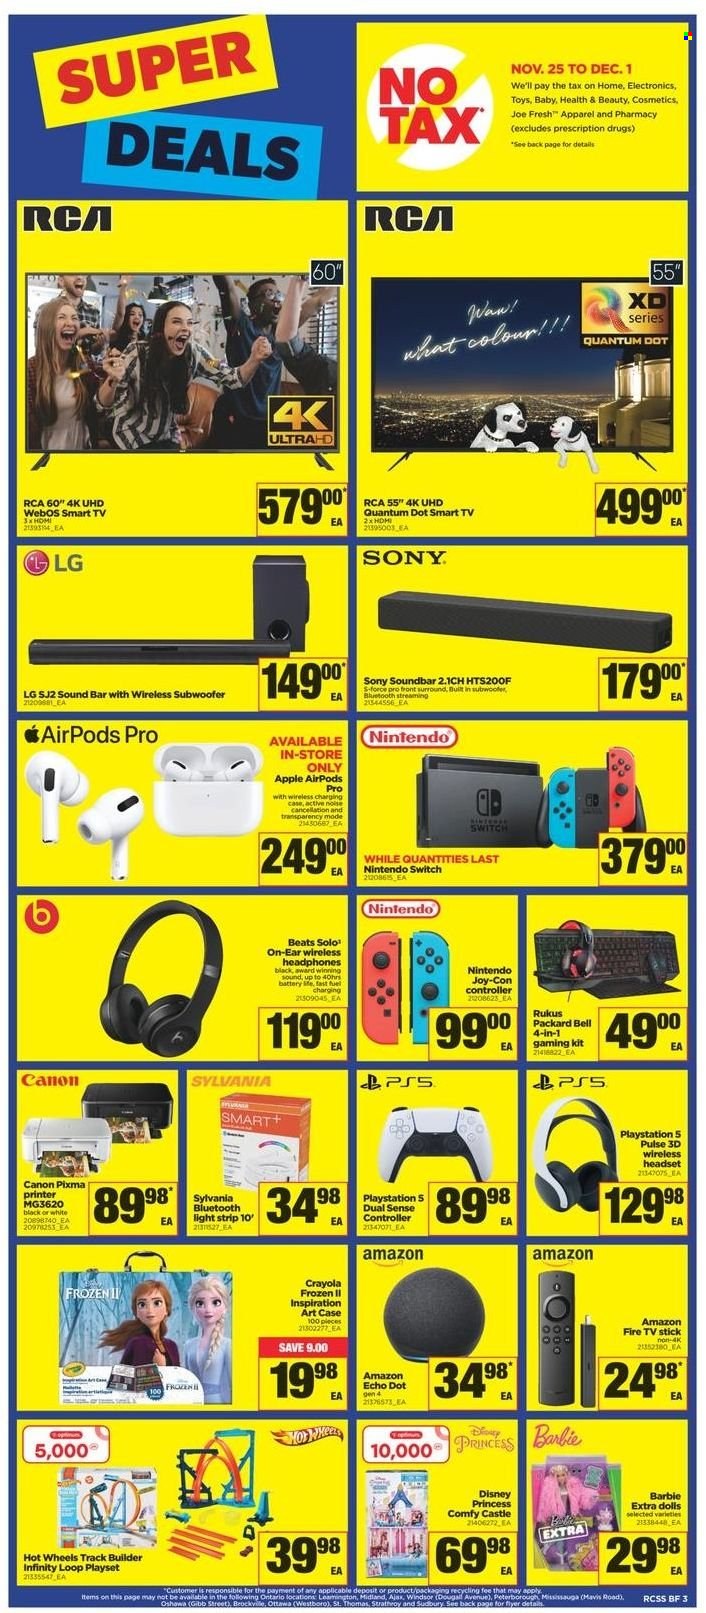 thumbnail - Real Canadian Superstore Flyer - November 25, 2021 - December 01, 2021 - Sales products - Sony, Nintendo Switch, webos, Apple, Amazon Fire, Disney, Castle, Hot Wheels, Infinity, Barbie, crayons, battery, Sylvania, RCA, PlayStation, PlayStation 5, TV, Beats, Amazon Echo Dot, subwoofer, wireless subwoofer, Amazon Echo, sound bar, headset, wireless headphones, headphones, Airpods, Apple AirPods Pro, Fire TV Stick, doll, play set, toys, princess, light strip, Canon, LG, smart tv. Page 3.